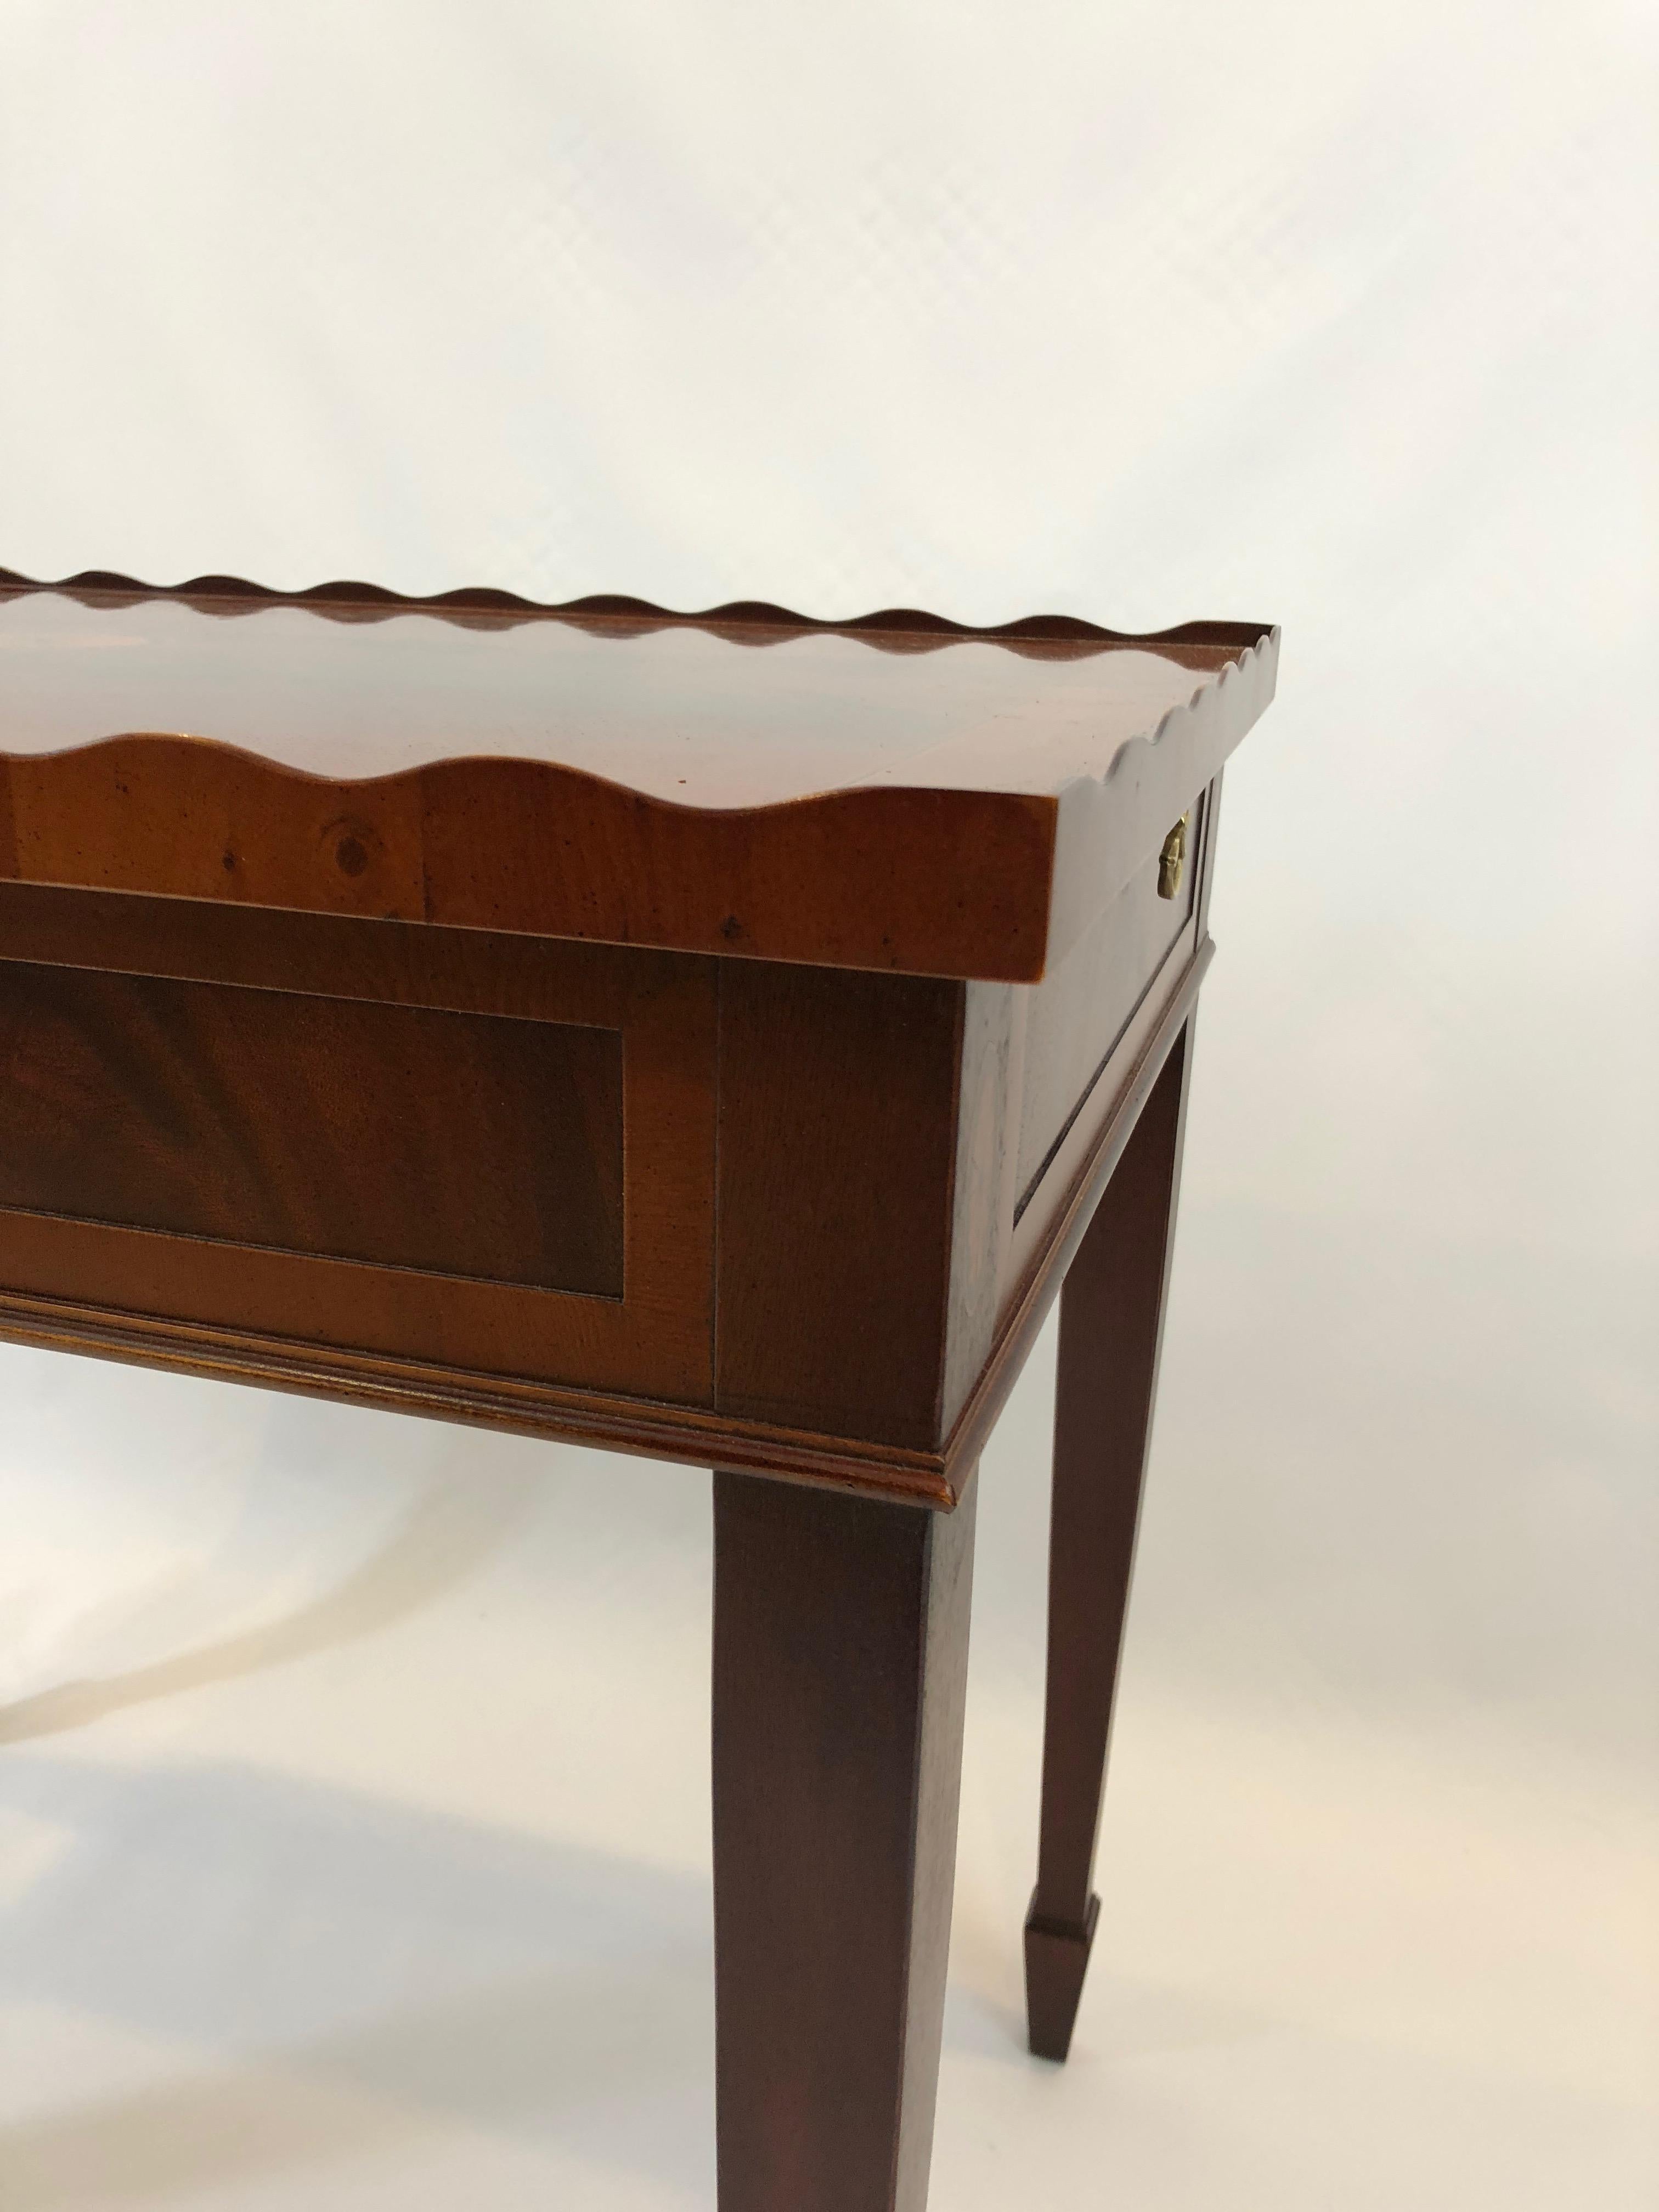 Superb Heckman Mahogany and Inlaid Tea Side Table with Scalloped Edge 1